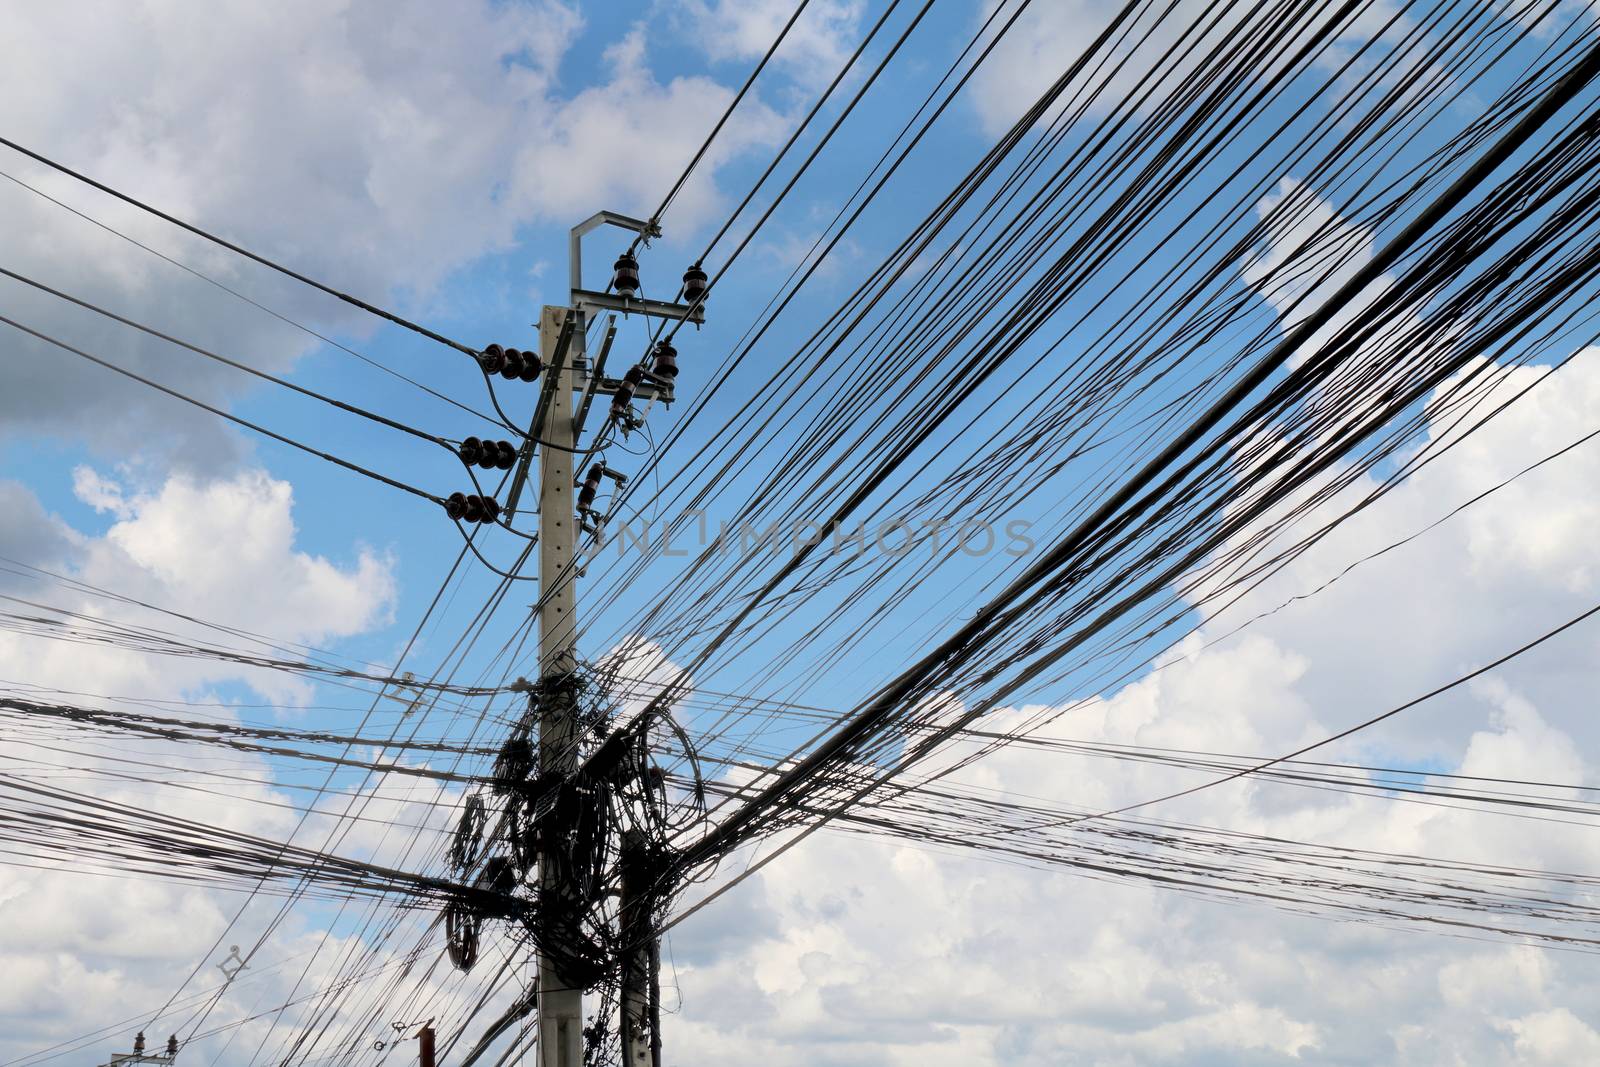 Tangle wire on road, wire in Thailand electrical energy at walking streets side sky background